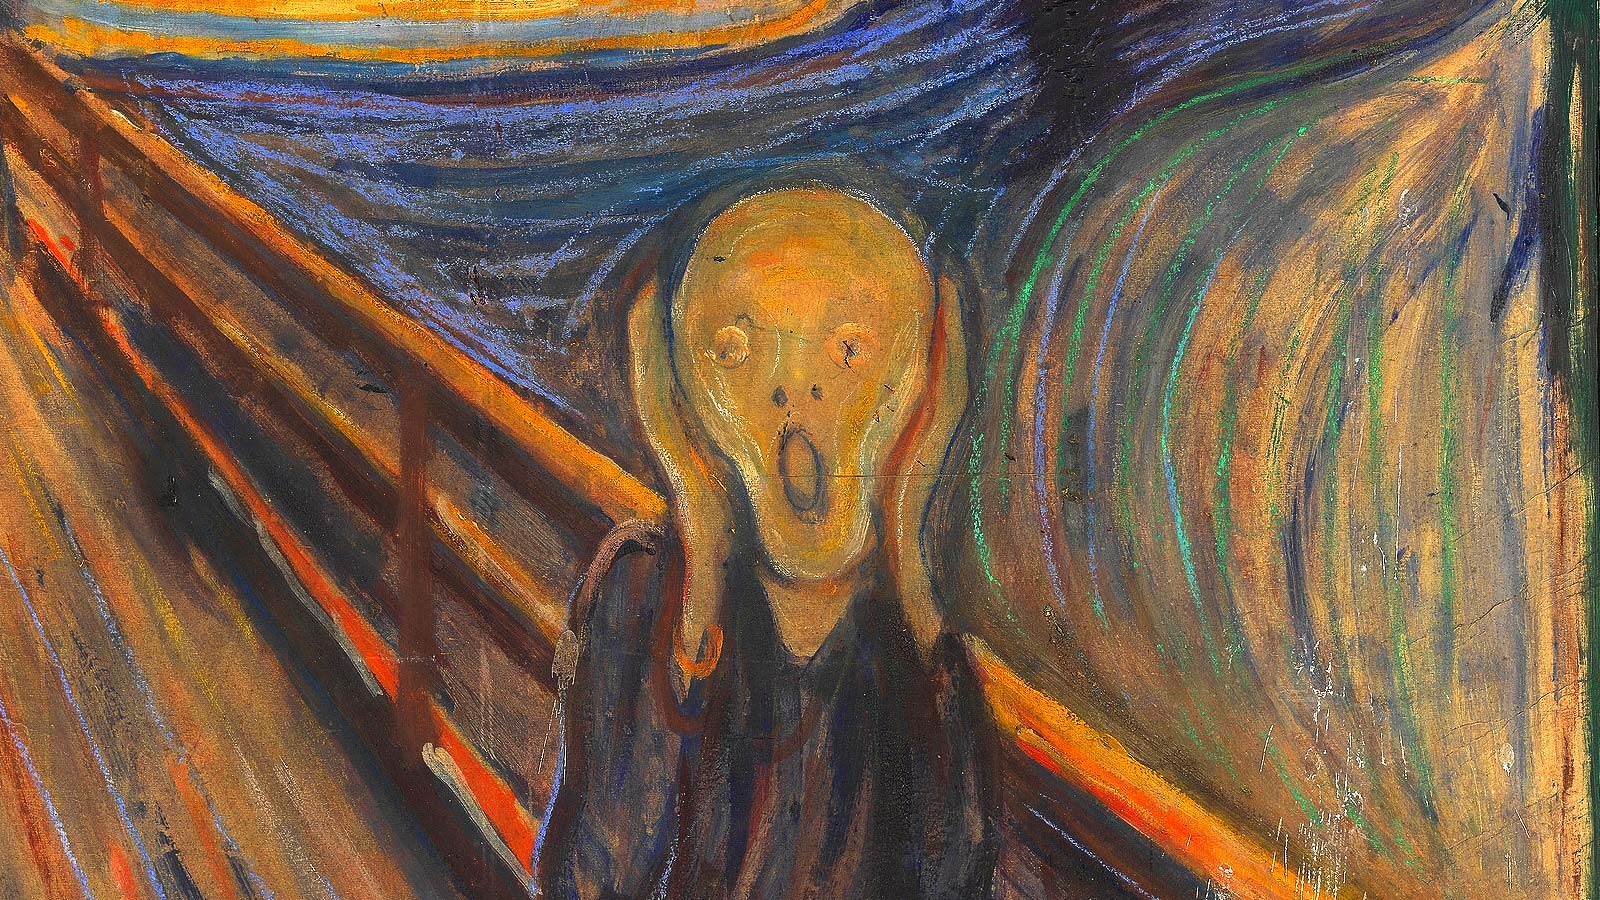 🤓 If You Score 14/16 on This General Knowledge Quiz, You’re a Nerd The Scream painting by Edvard Munch